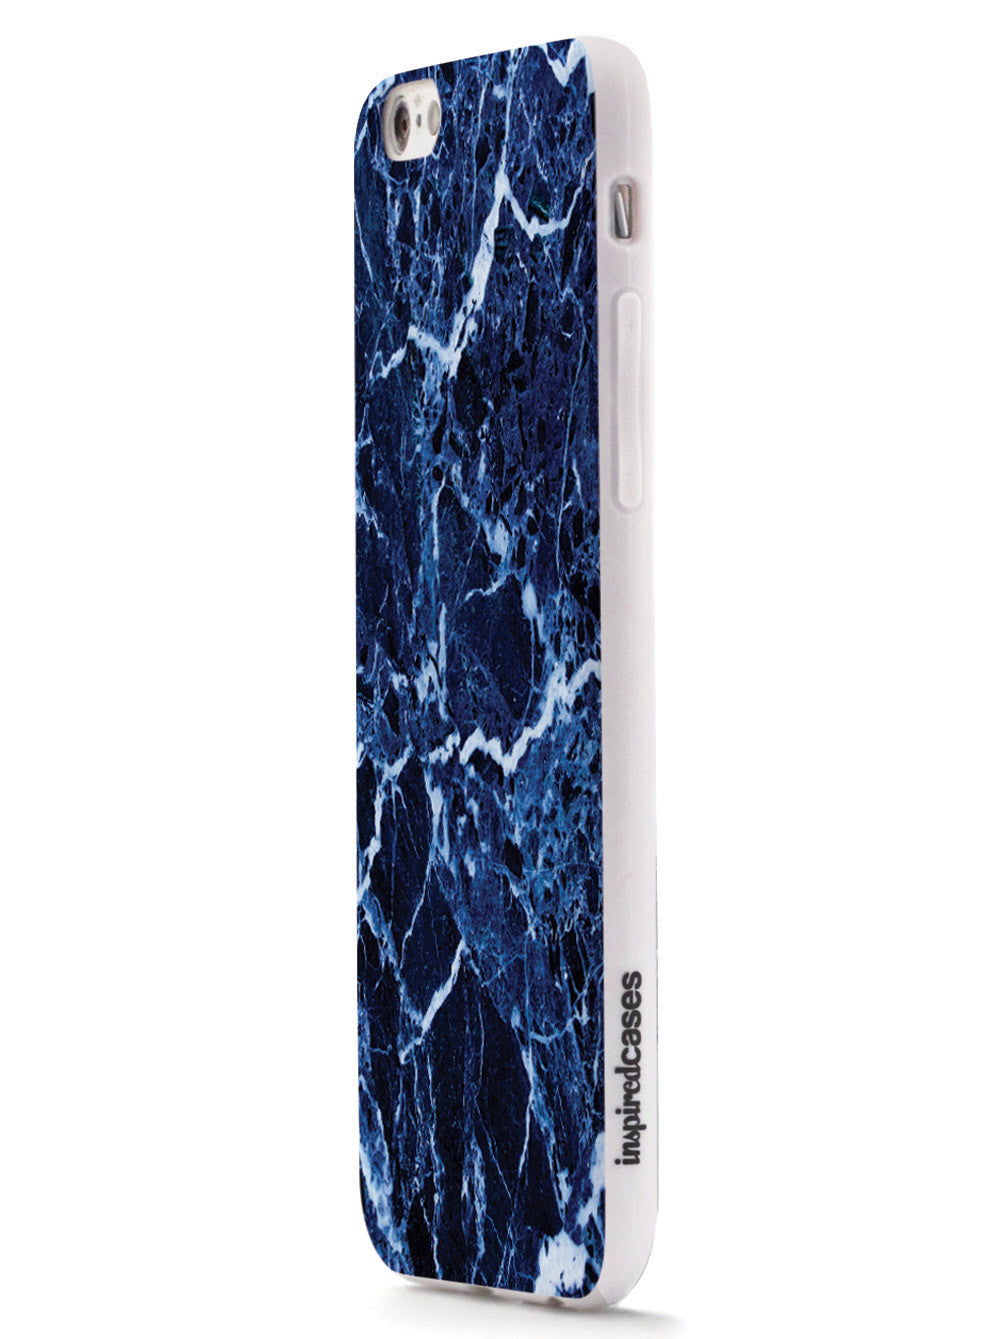 Textured Blue Marble Case